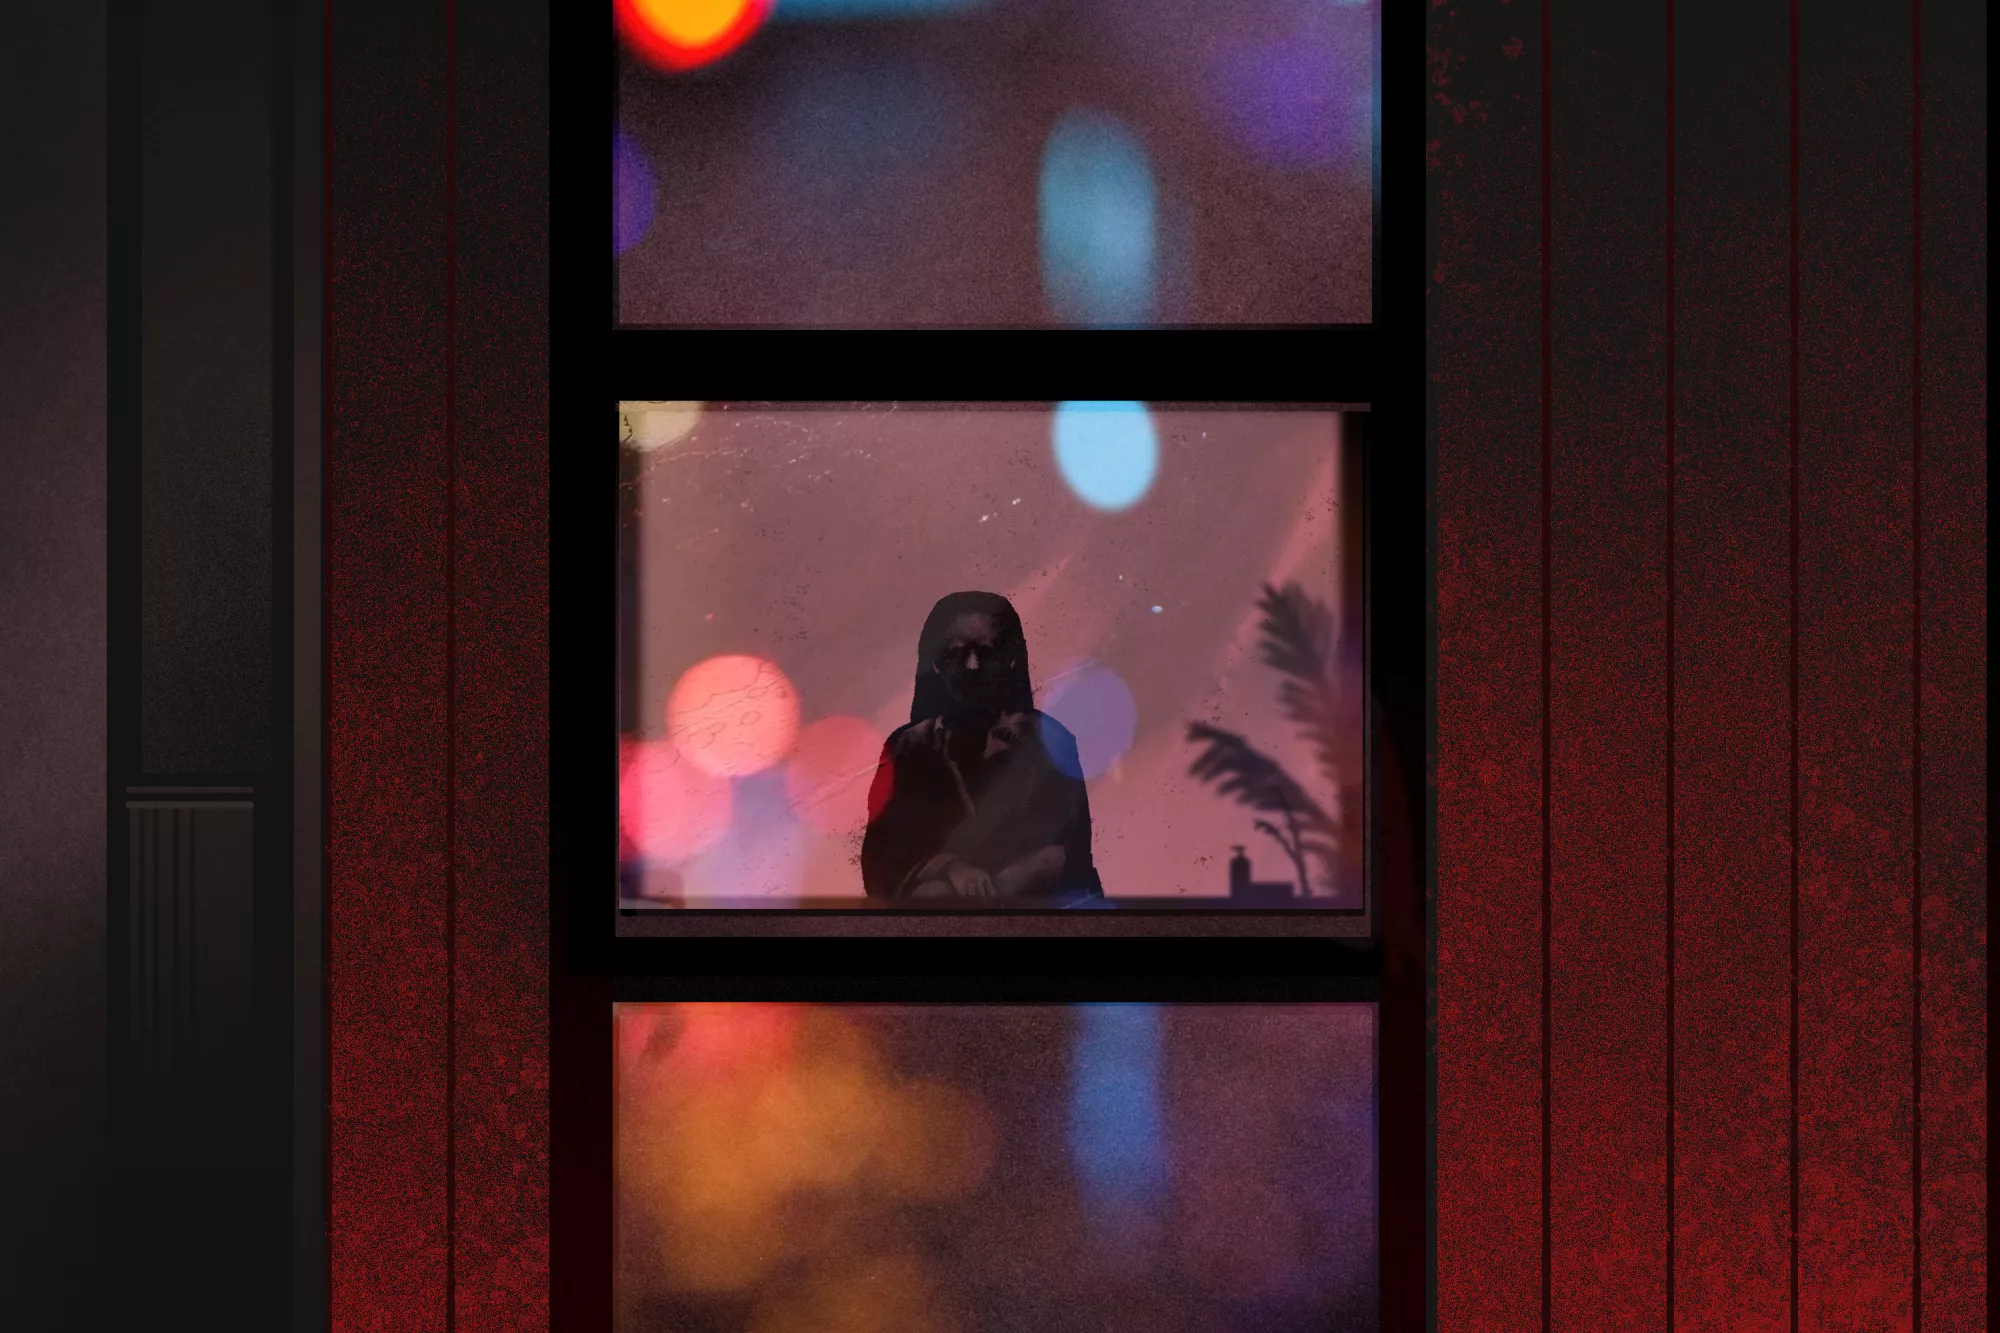 Silhouette of a seated woman seen through a window with red and blue lights reflected in the glass